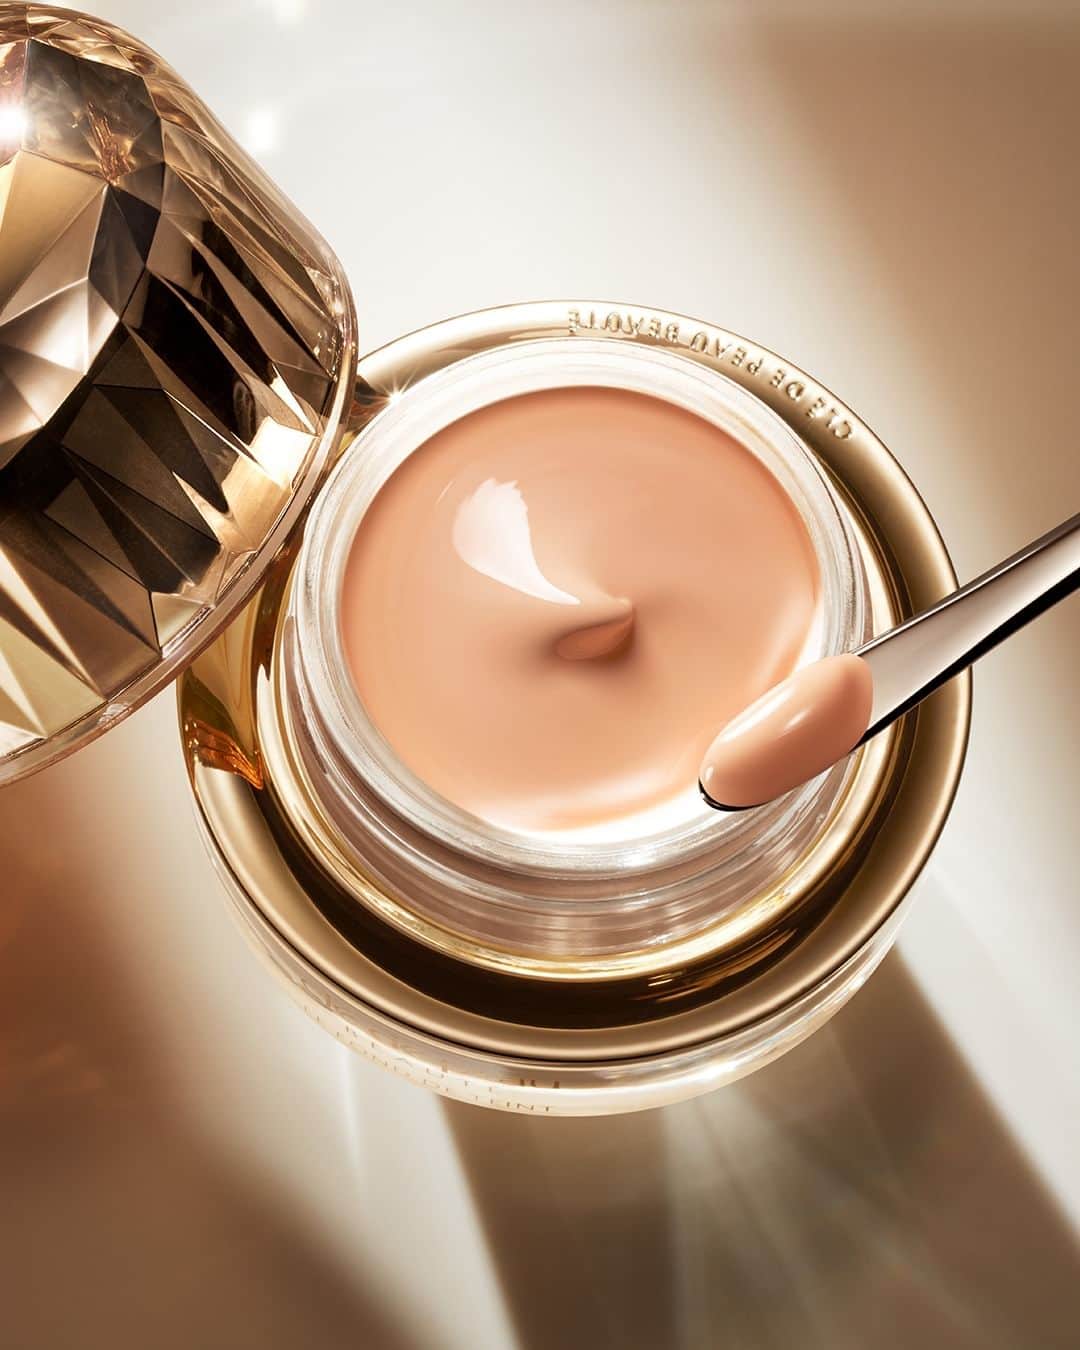 Clé de Peau Beauté Officialのインスタグラム：「A foundation that evens out your skin tone but also nourishes it from within? This is not a fantasy – our ultra-luxe #TheFoundation is a harmonious marriage between skincare and makeup. Not only does it offer flawless coverage, this skincare powerhouse delivers shots of hydration to your skin over a 24-hour period, leaving it thoroughly moisturized and irresistibly soft to the touch, even after you take it off 😍   肌を美しく見せることもちろん、今日よりも明日、さらにその先の未来の肌を美しく導くファンデーション？これは空想ではありません。 クレ・ド・ポー ボーテ #ルフォンドゥタンｎ は、ファンデーションのカテゴリーを超えた圧倒的なスキンケア効果を融合し、瞬間的な美しさだけでなく、肌そのものの未来を考えたファンデーションです。 つけたての輝く美しい仕上がりが１日中*持続します😍   *24 時間化粧持ち（輝きのあるつや・テカリ・ヨレ・色くすみのなさ）データ取得済み」